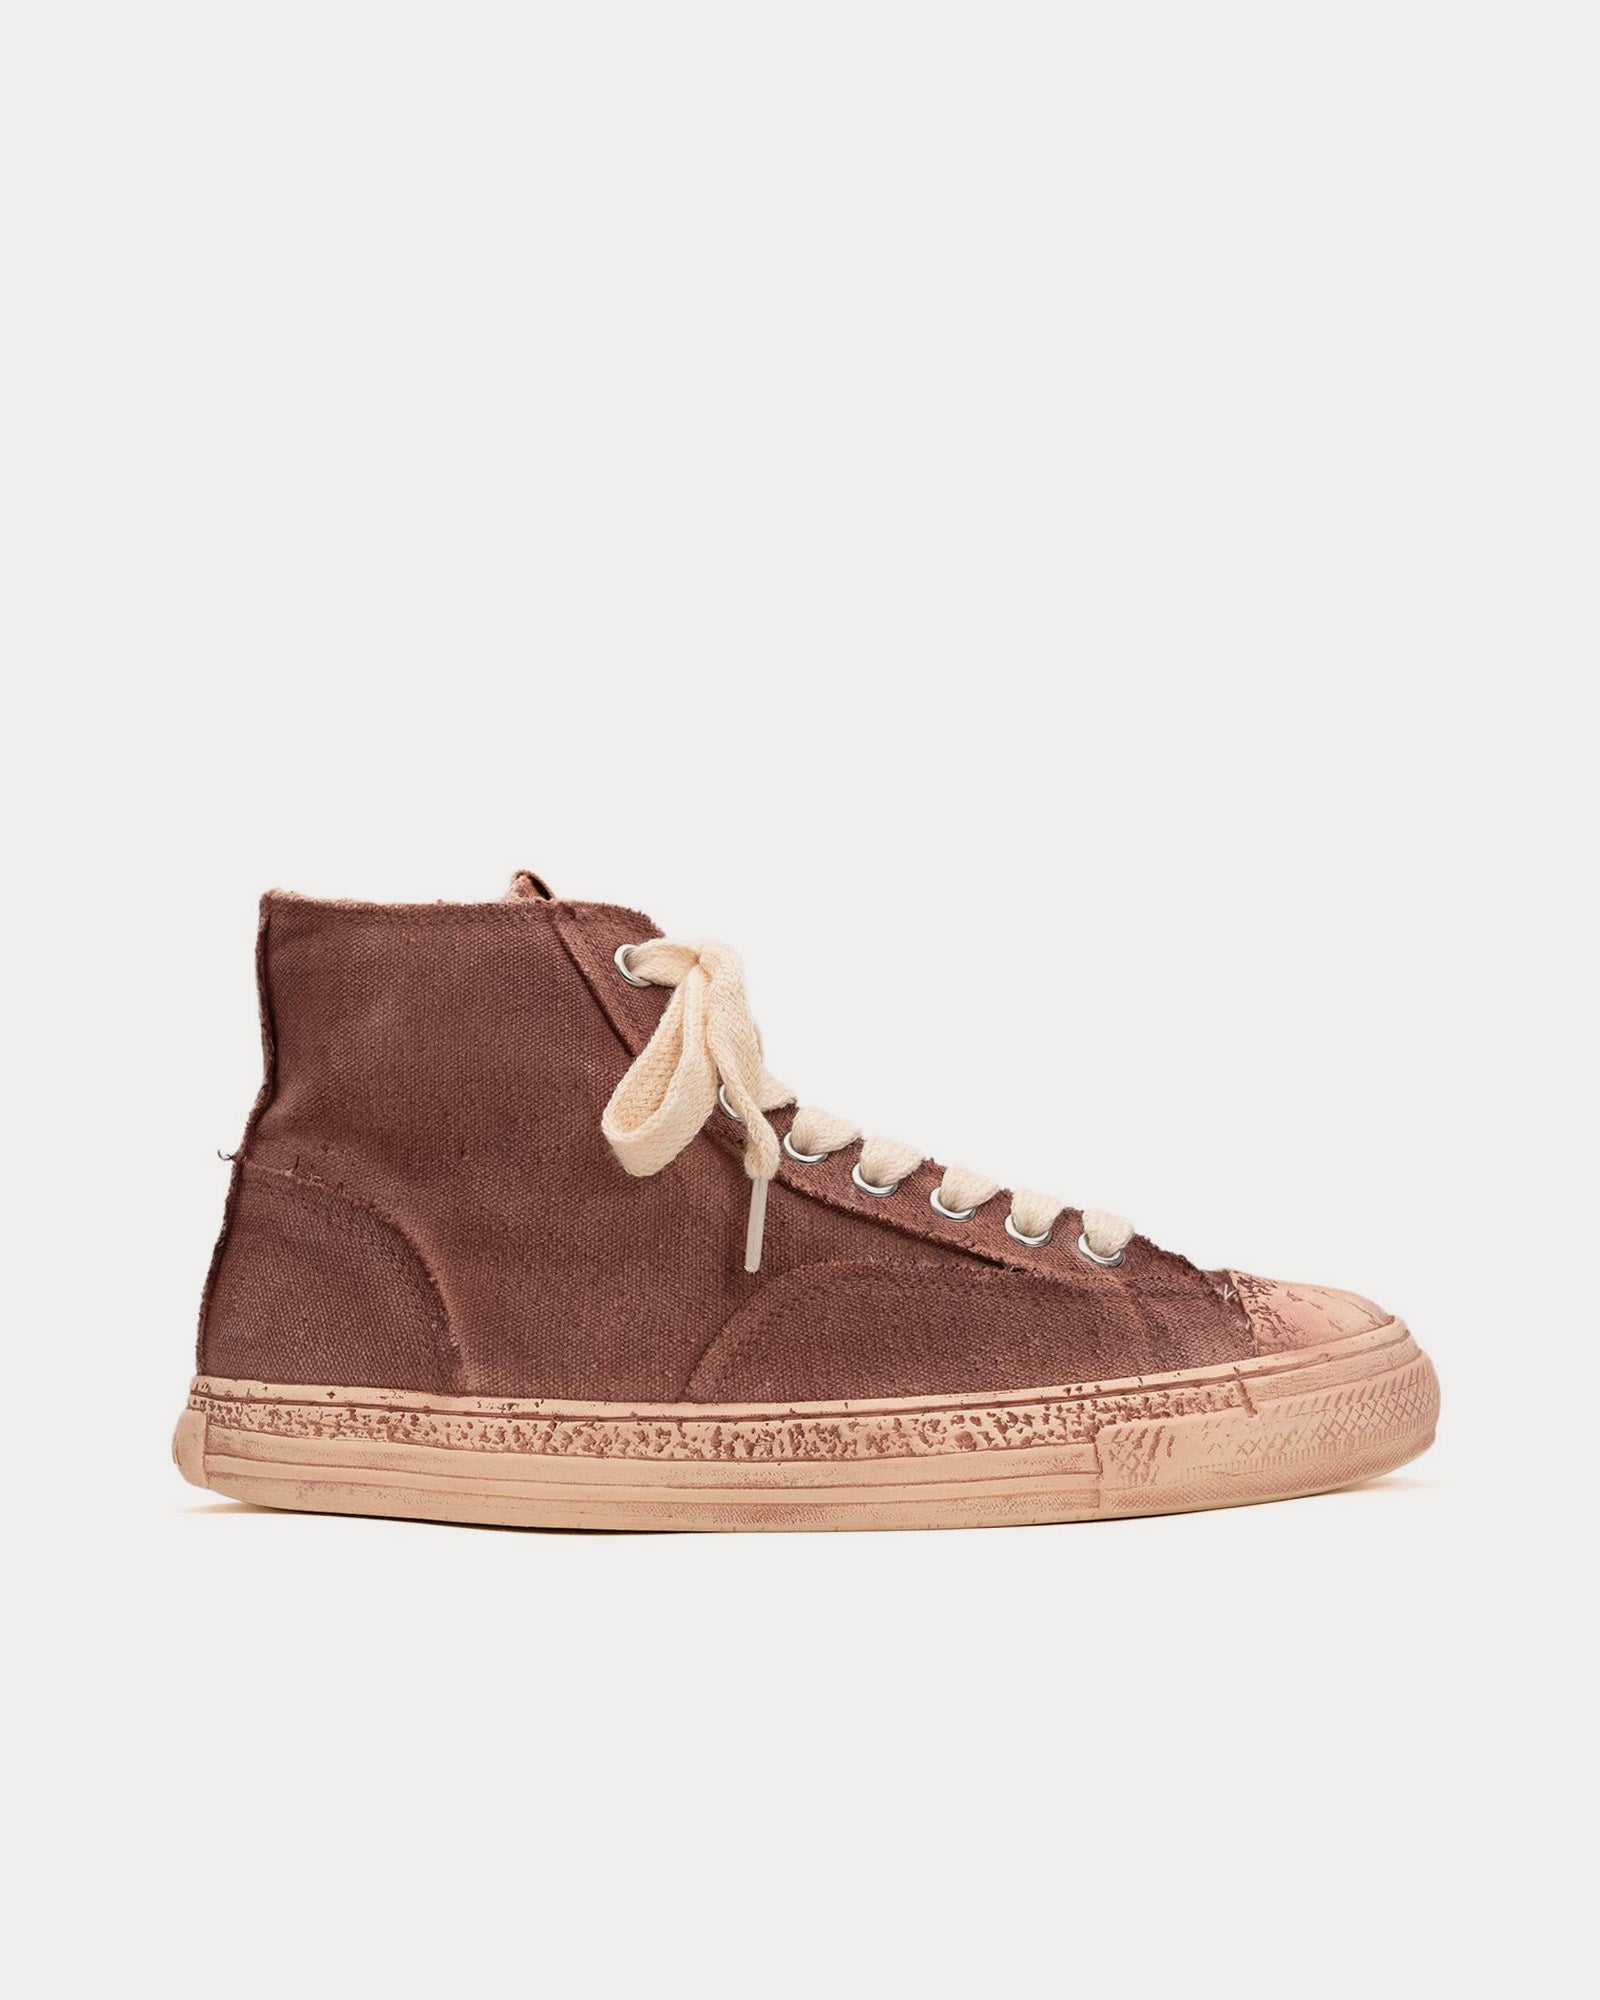 General Scale By Maison Mihara Yasuhiro - Past Sole Overdyed Canvas Bordeaux High Top Sneakers